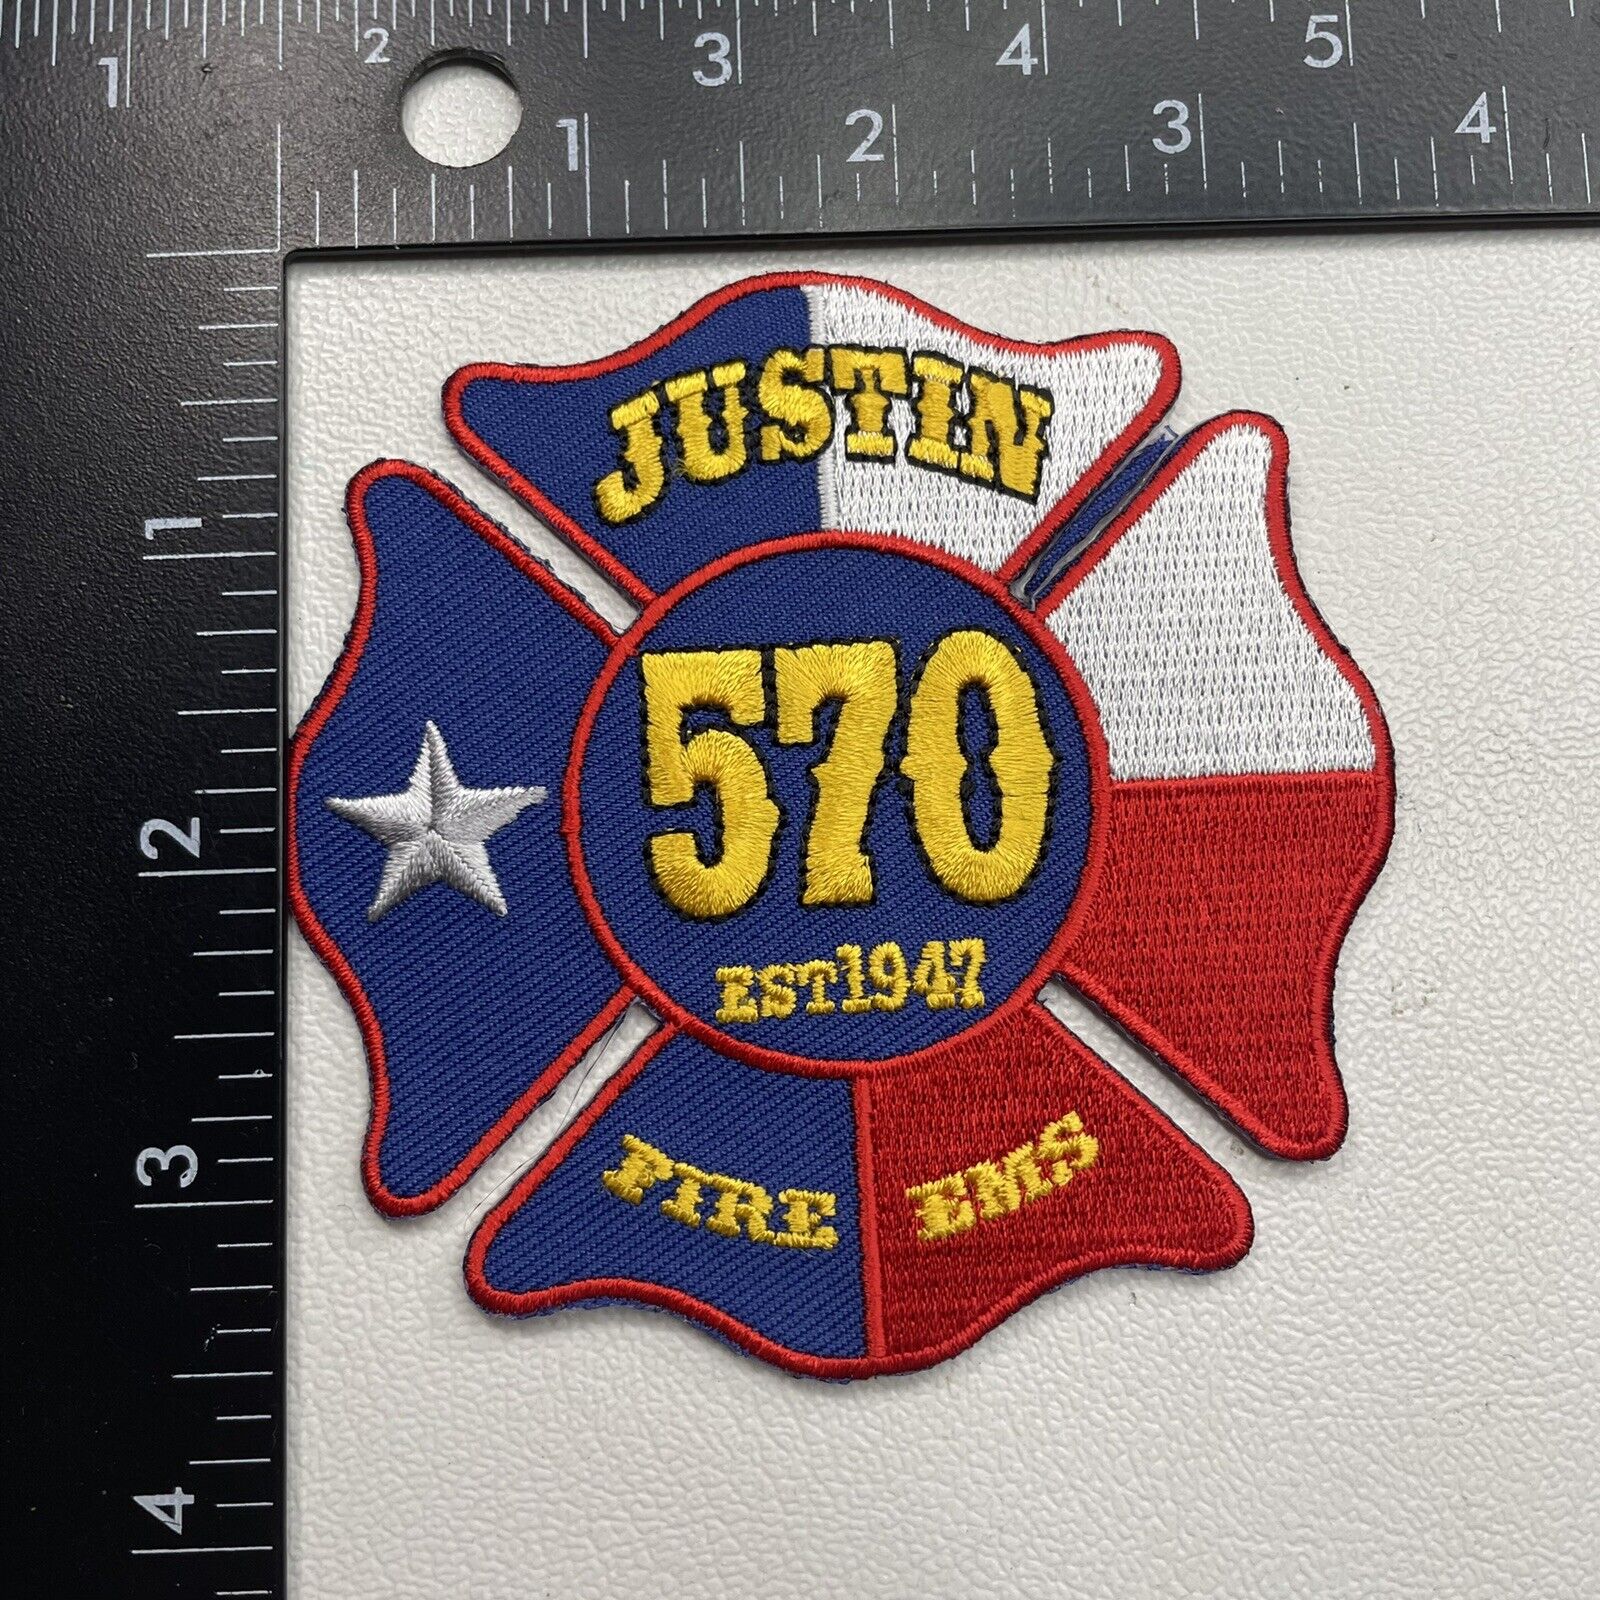 Texas JUSTIN 570 Fire Department Patch O29P